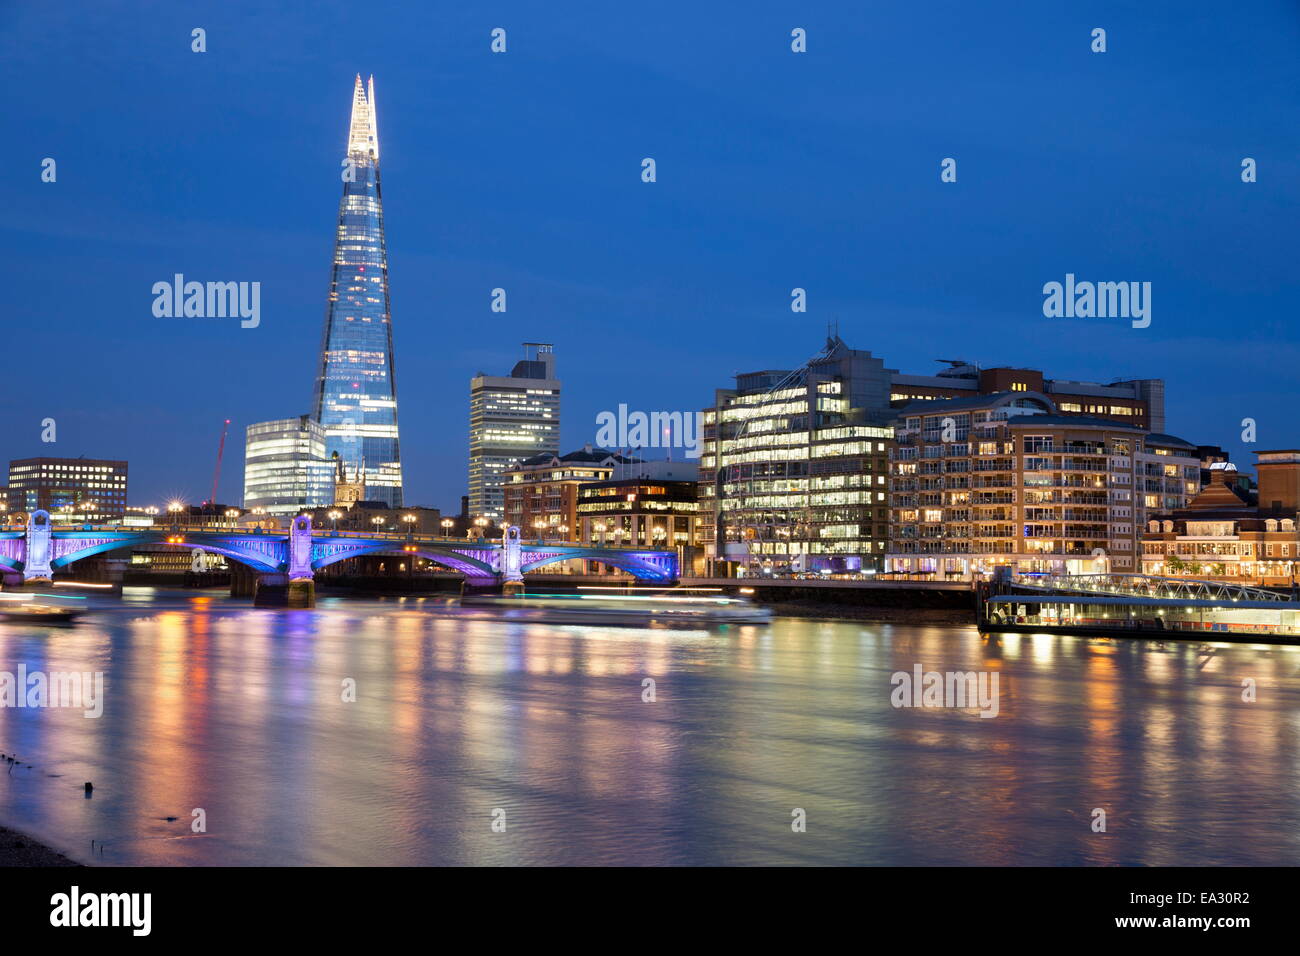 View over the River Thames with The Shard, London, England, United Kingdom, Europe Stock Photo